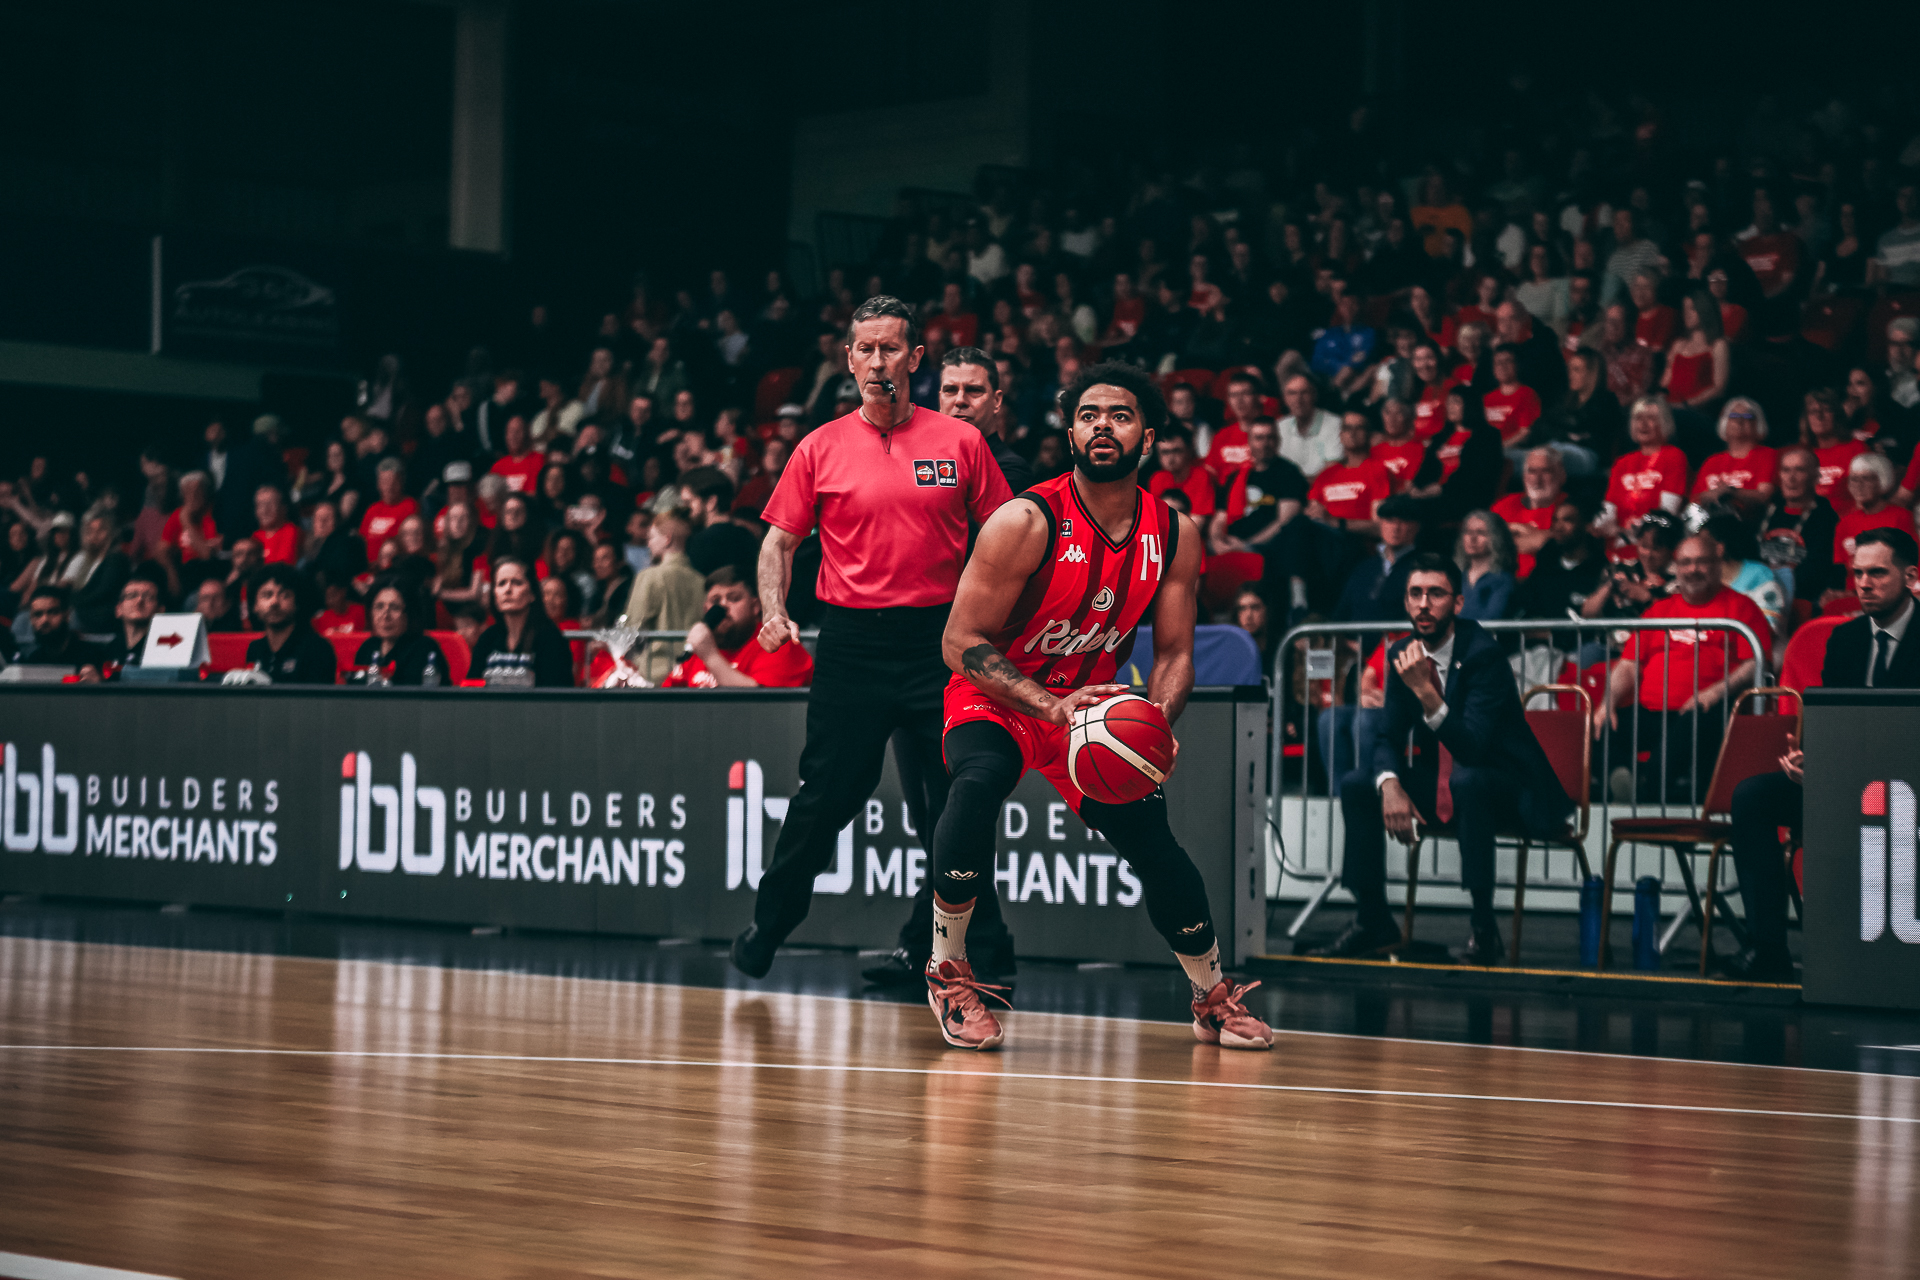 BBL Playoff Semi-final Preview: Riders vs Flyers